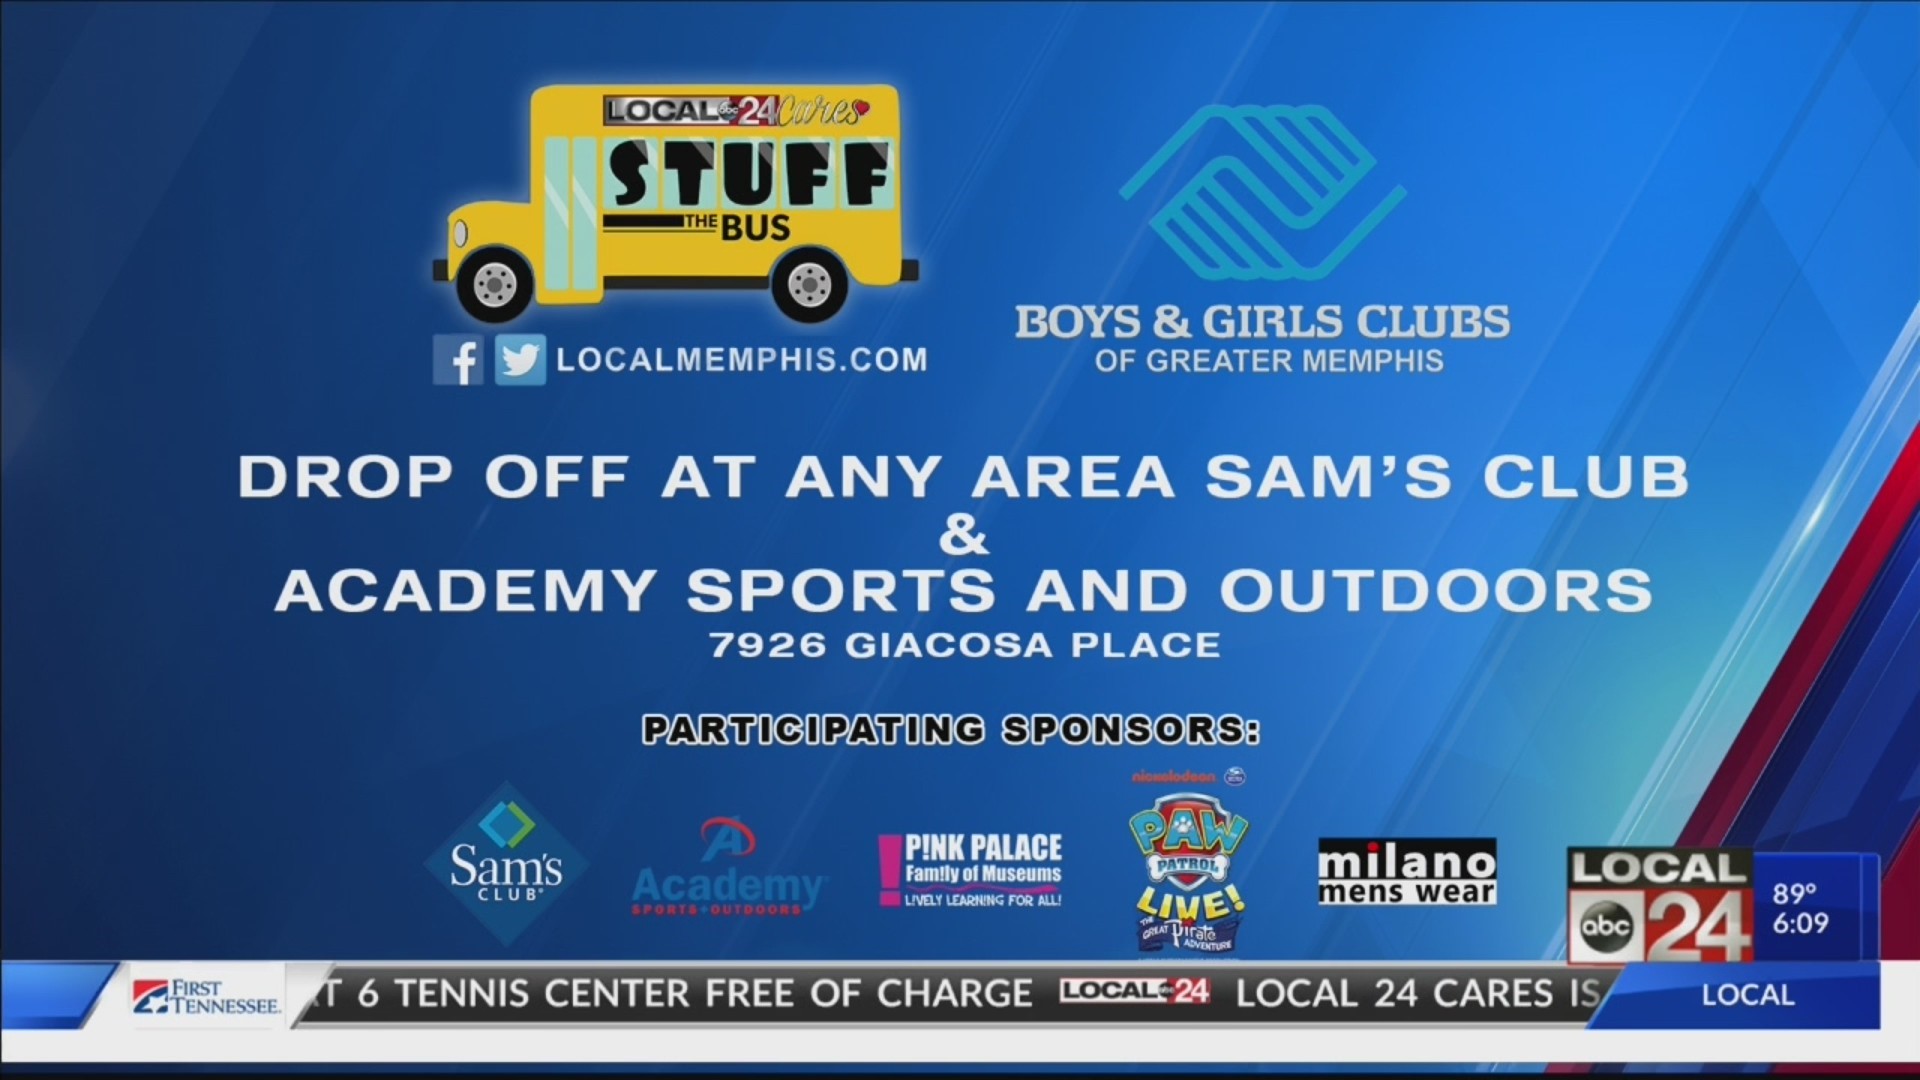 Help Local 24 Cares and the Boys & Girls Club “Stuff the Bus”